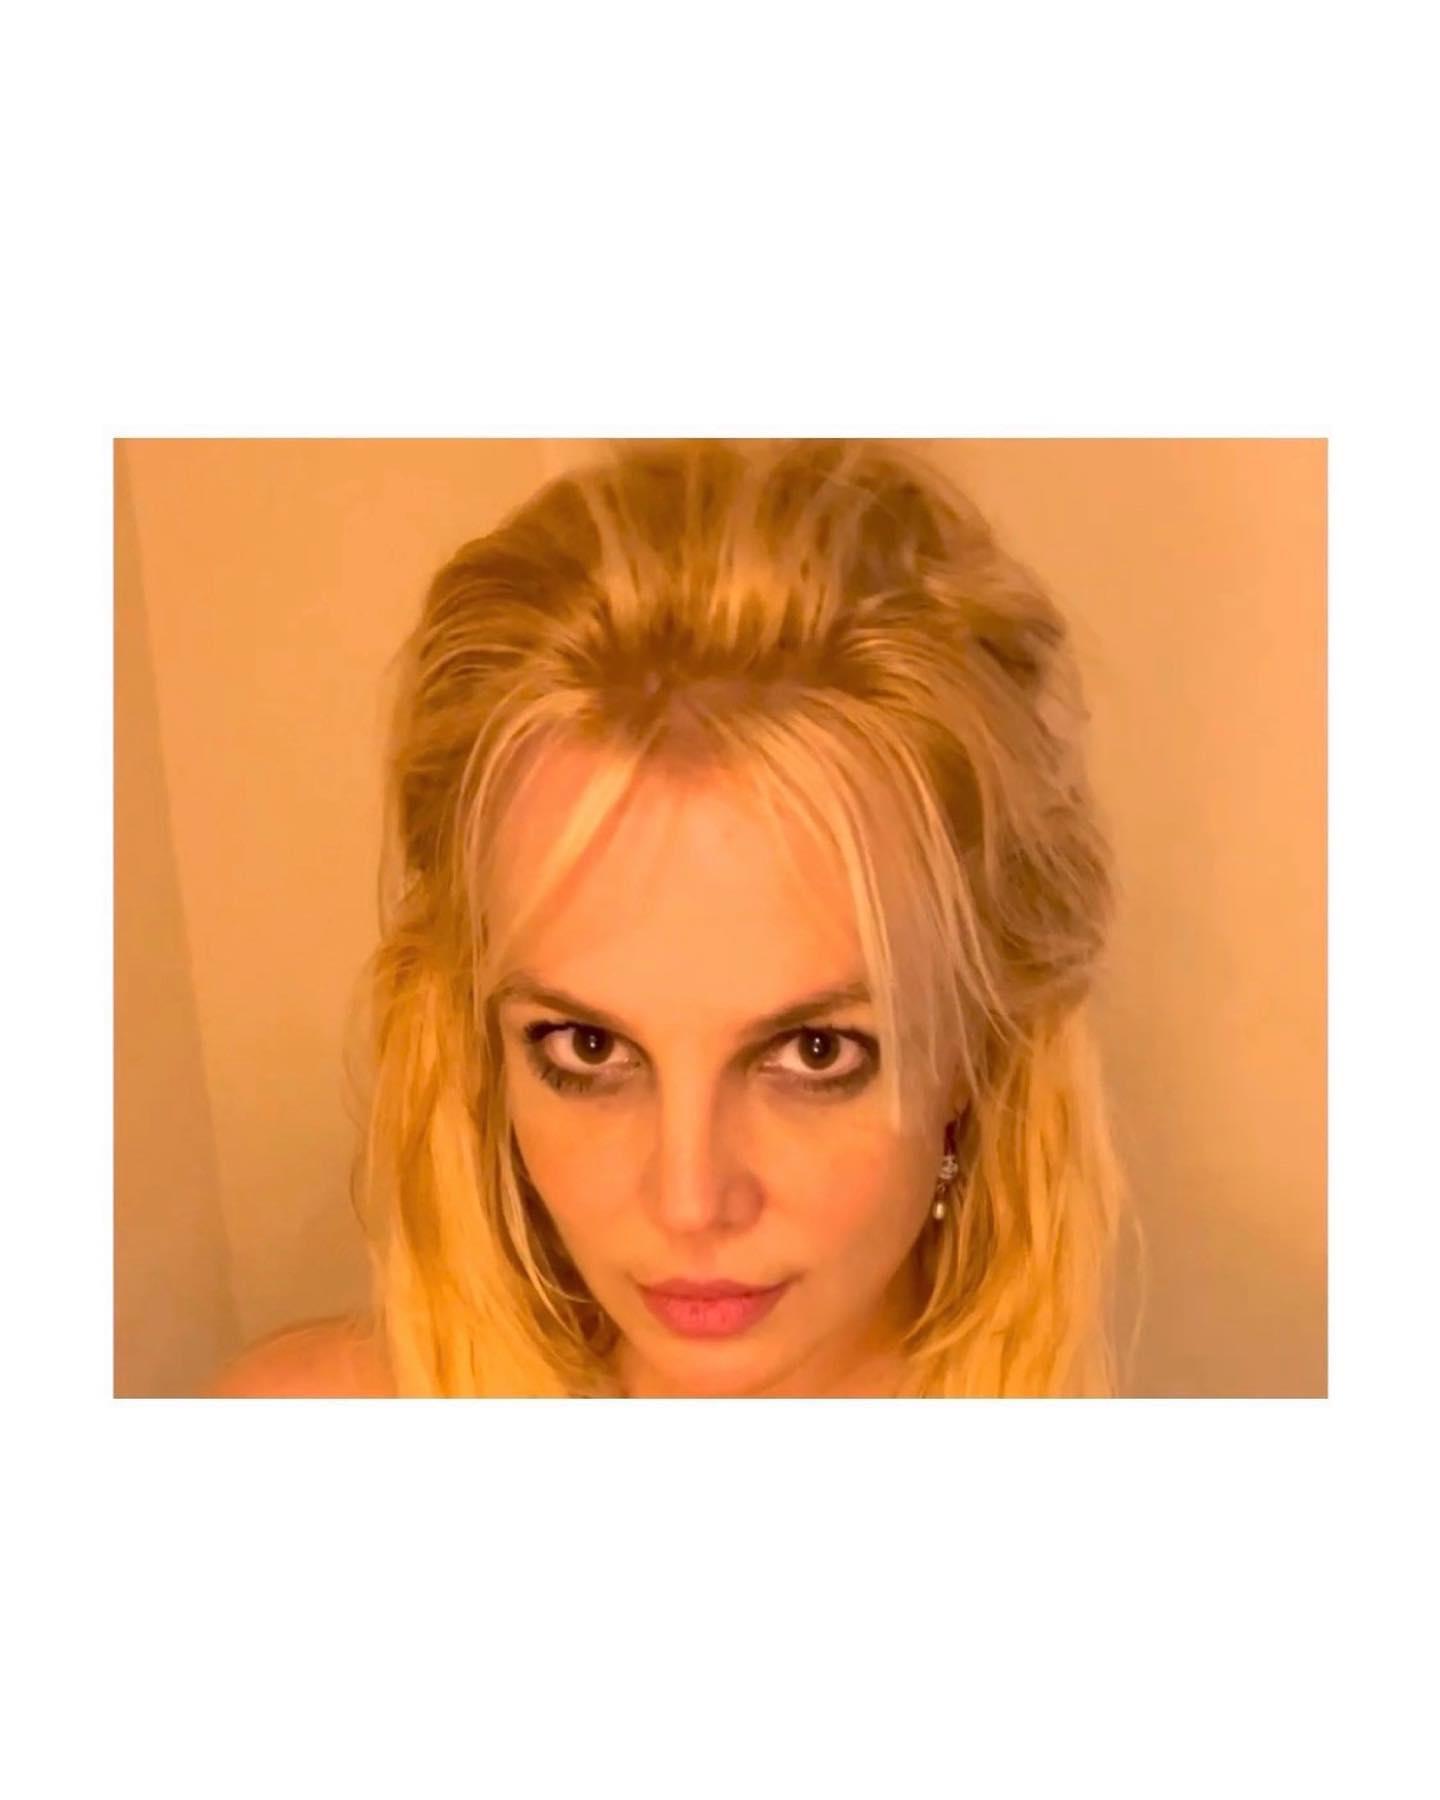 Britney Spears shows off old hairstyle